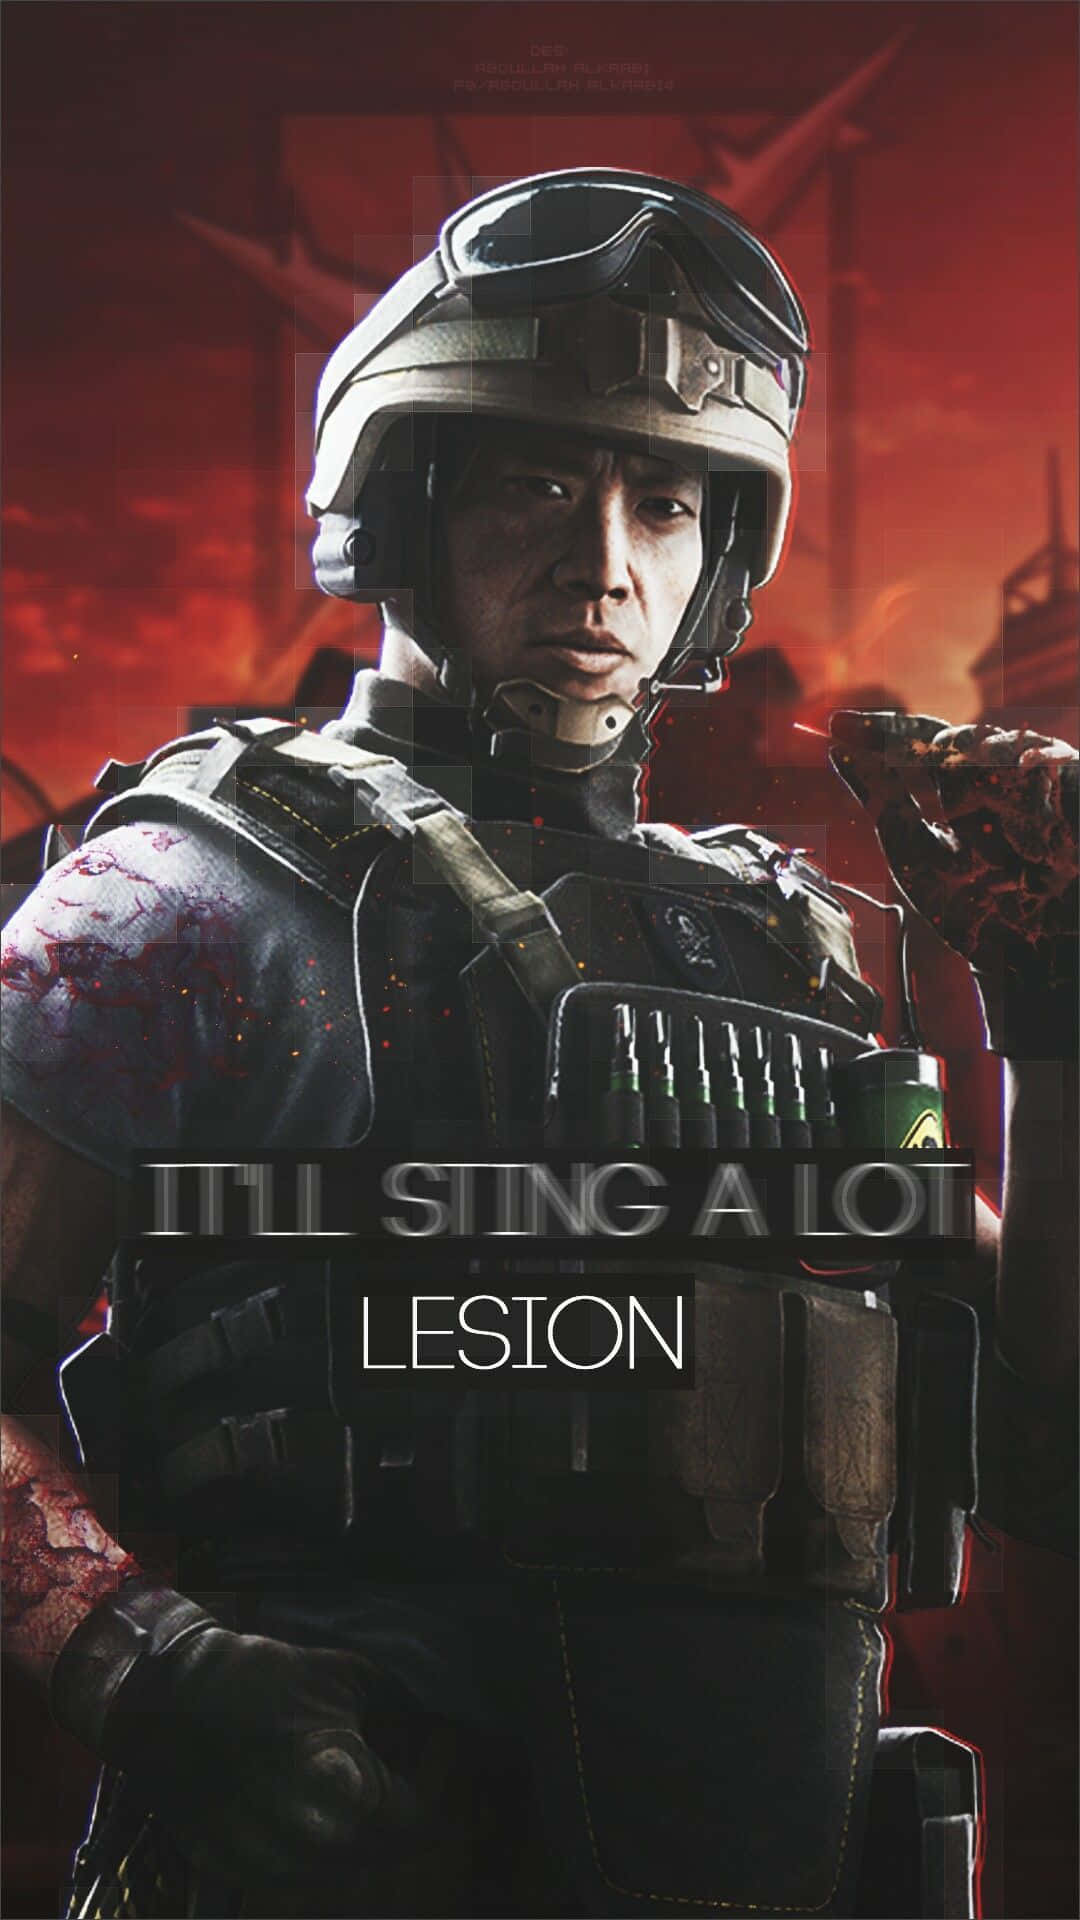 Rainbow Six Siege Lesion in Action Wallpaper